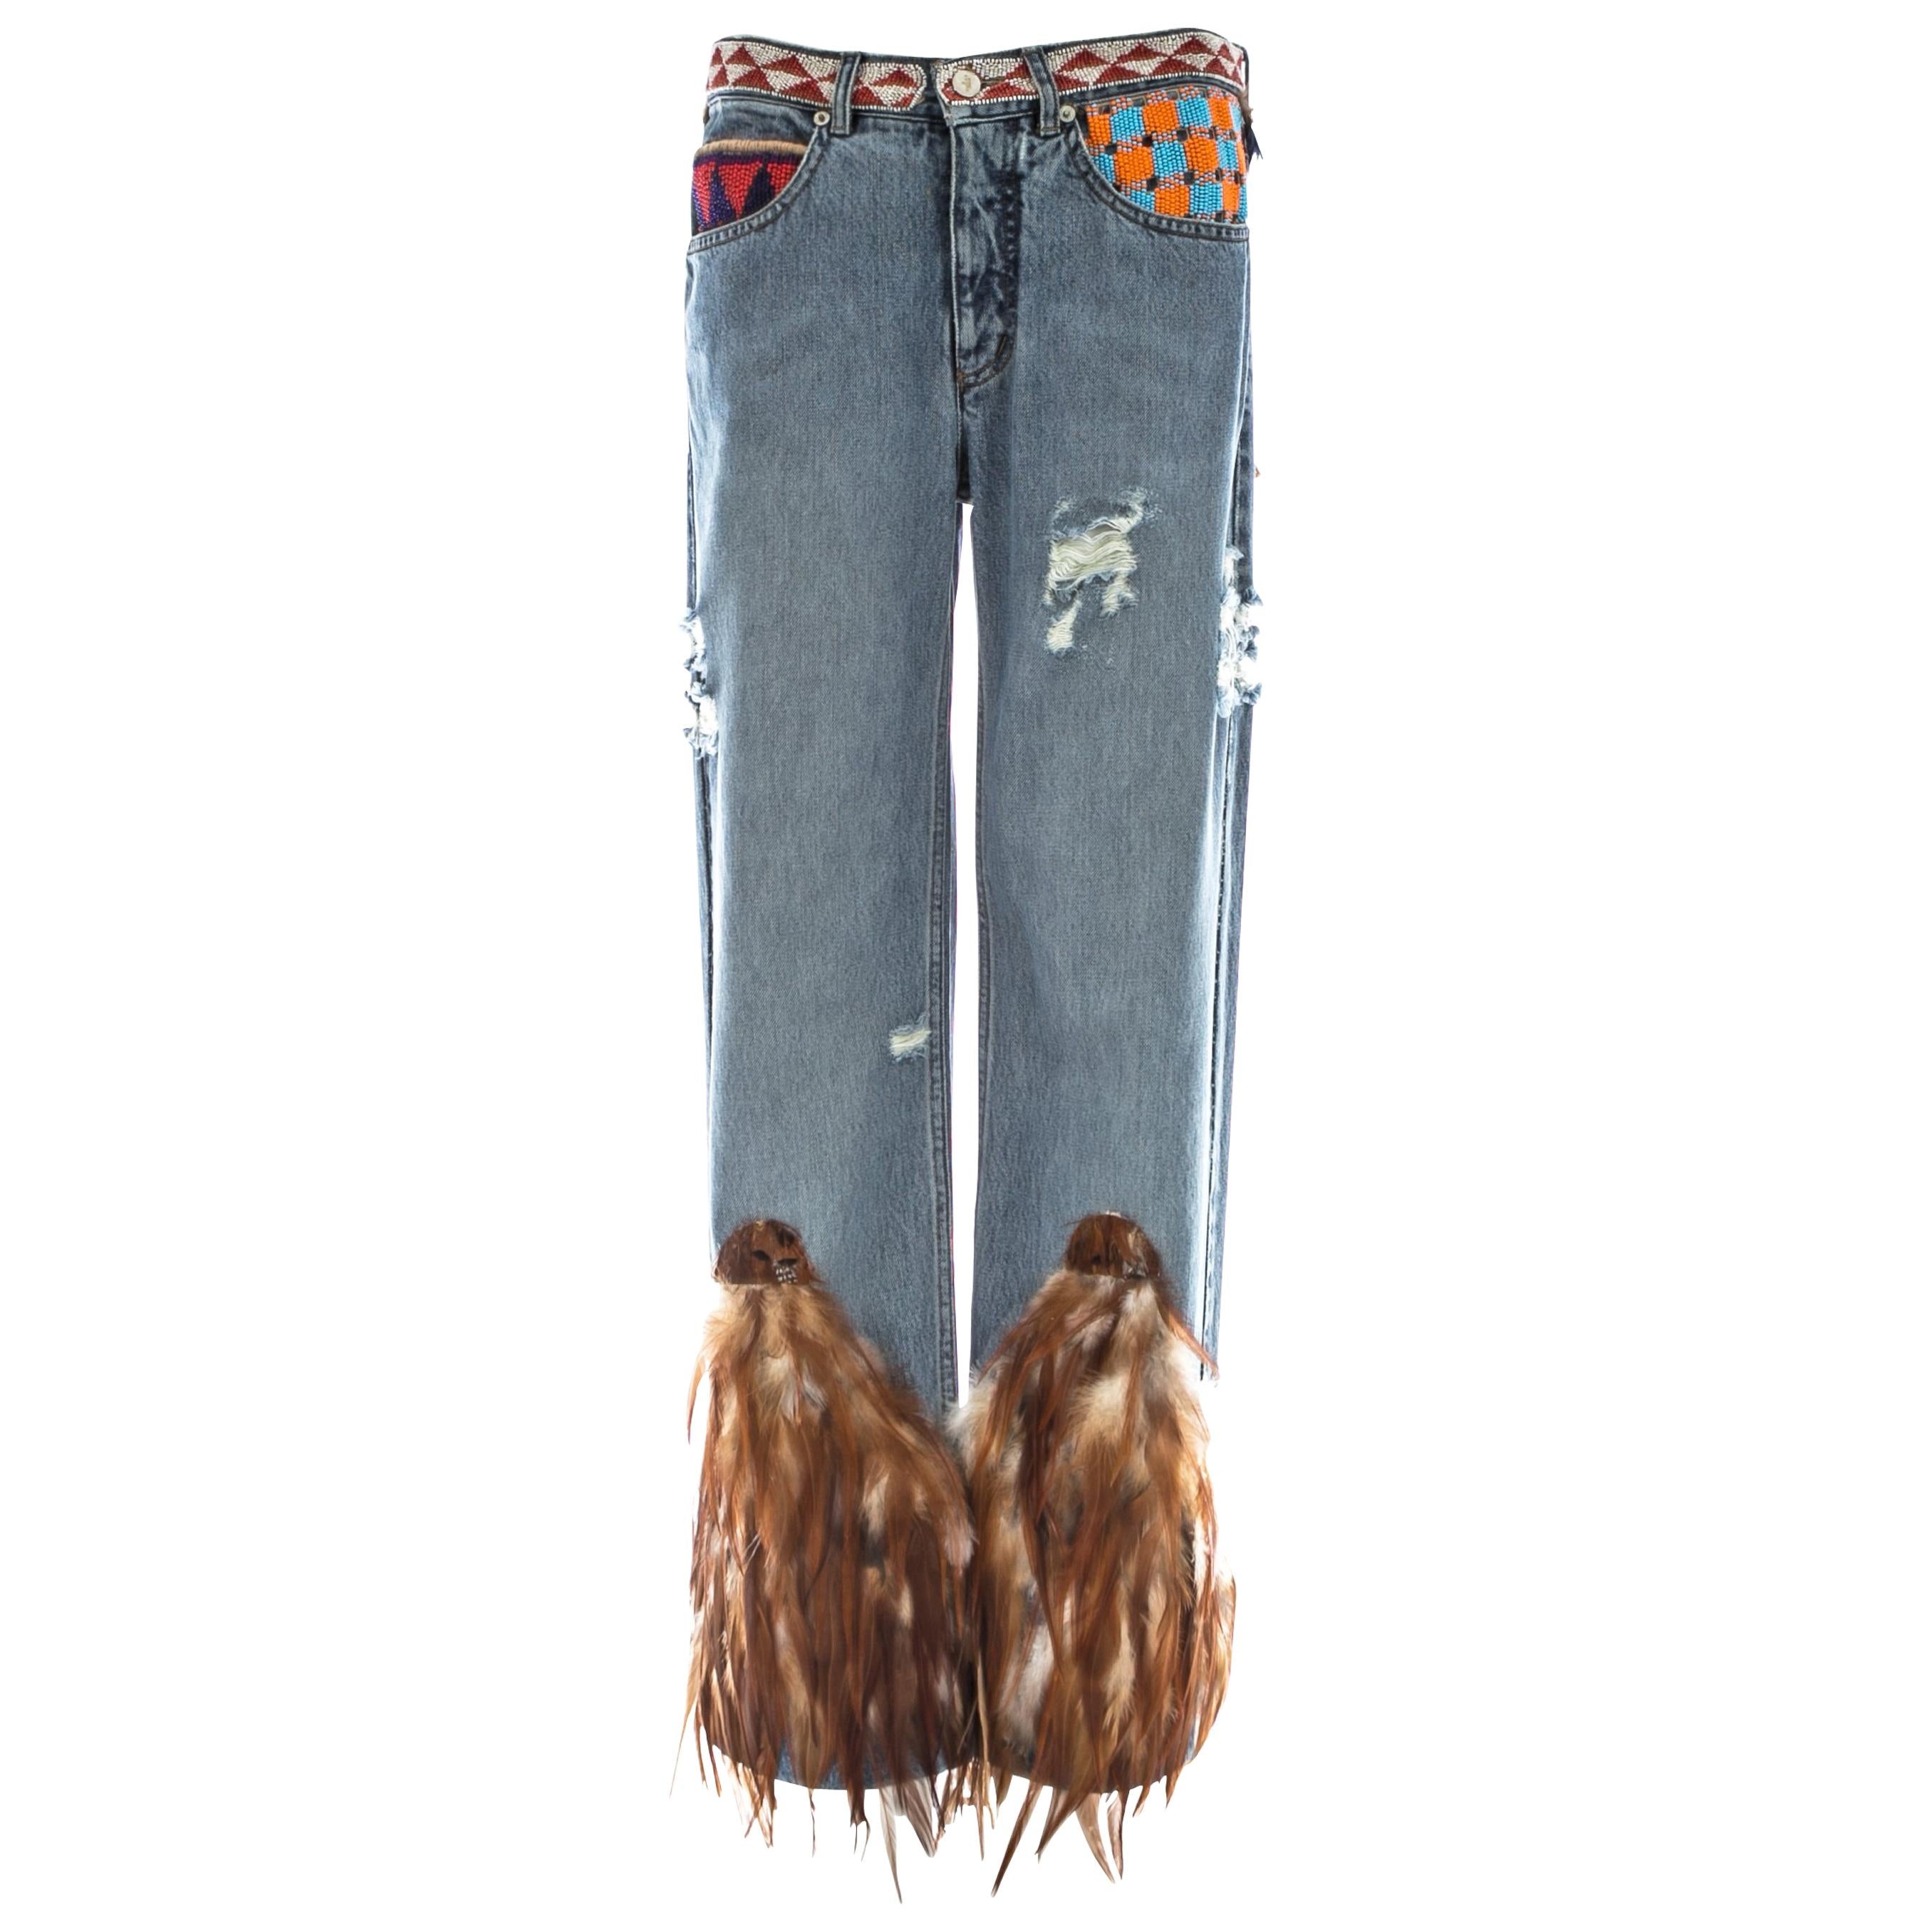 Gucci by Tom Ford blue denim beaded jeans with feathers, ss 1999